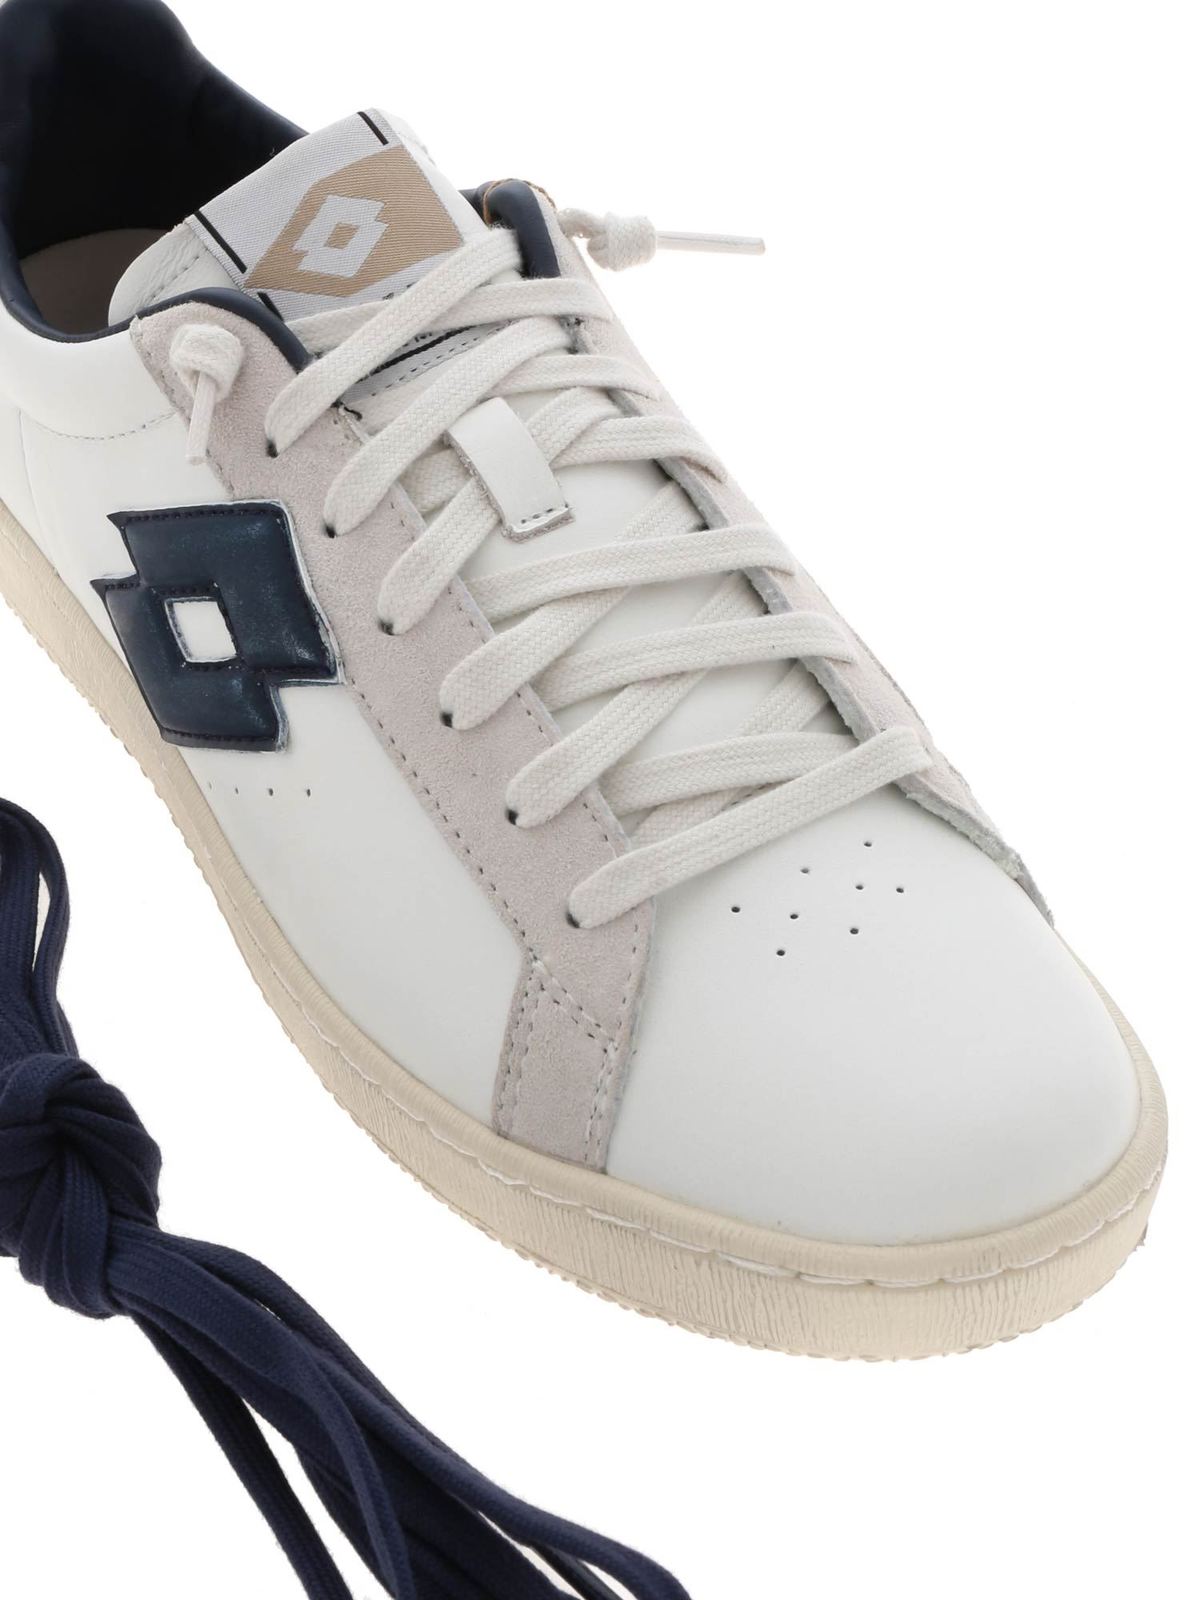 Lotto Leggenda - Autograph sneakers in white and blue - trainers - 2123875LS